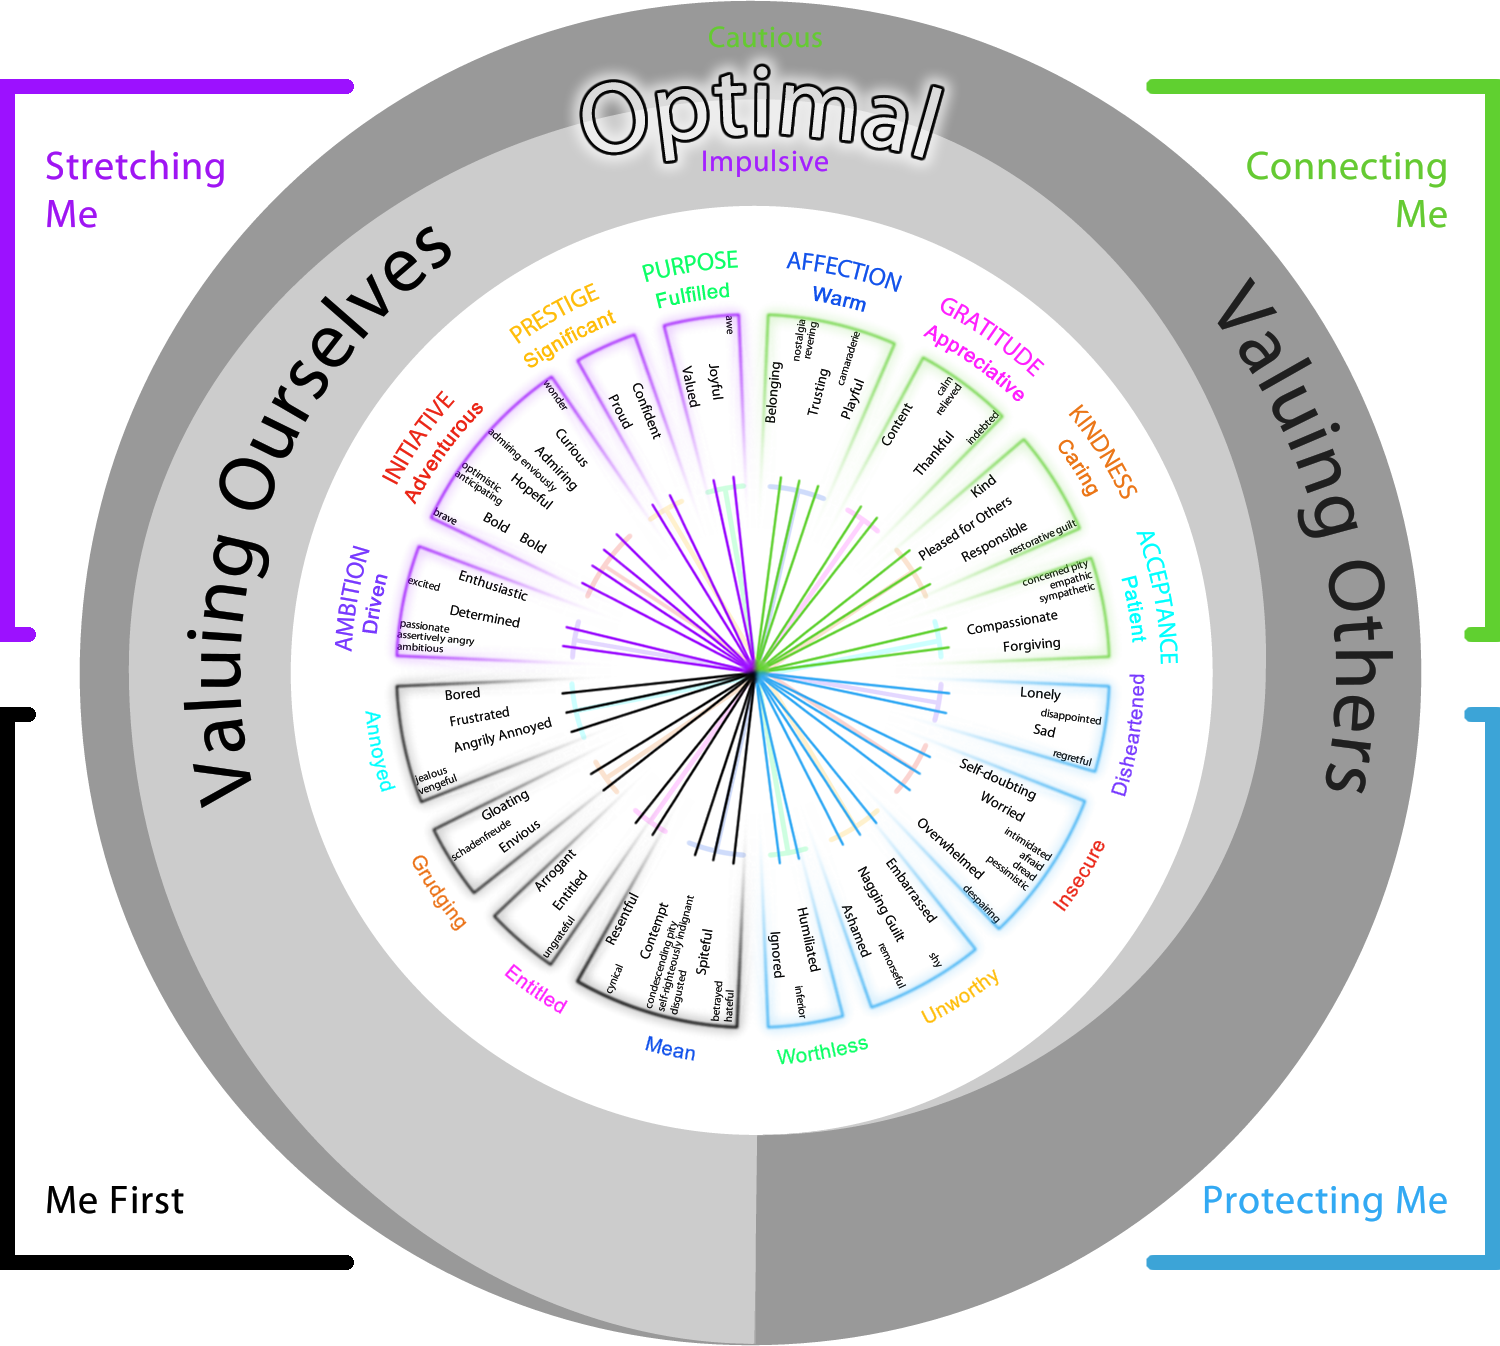 A full diagram of the wheel with all concepts displayed in place.